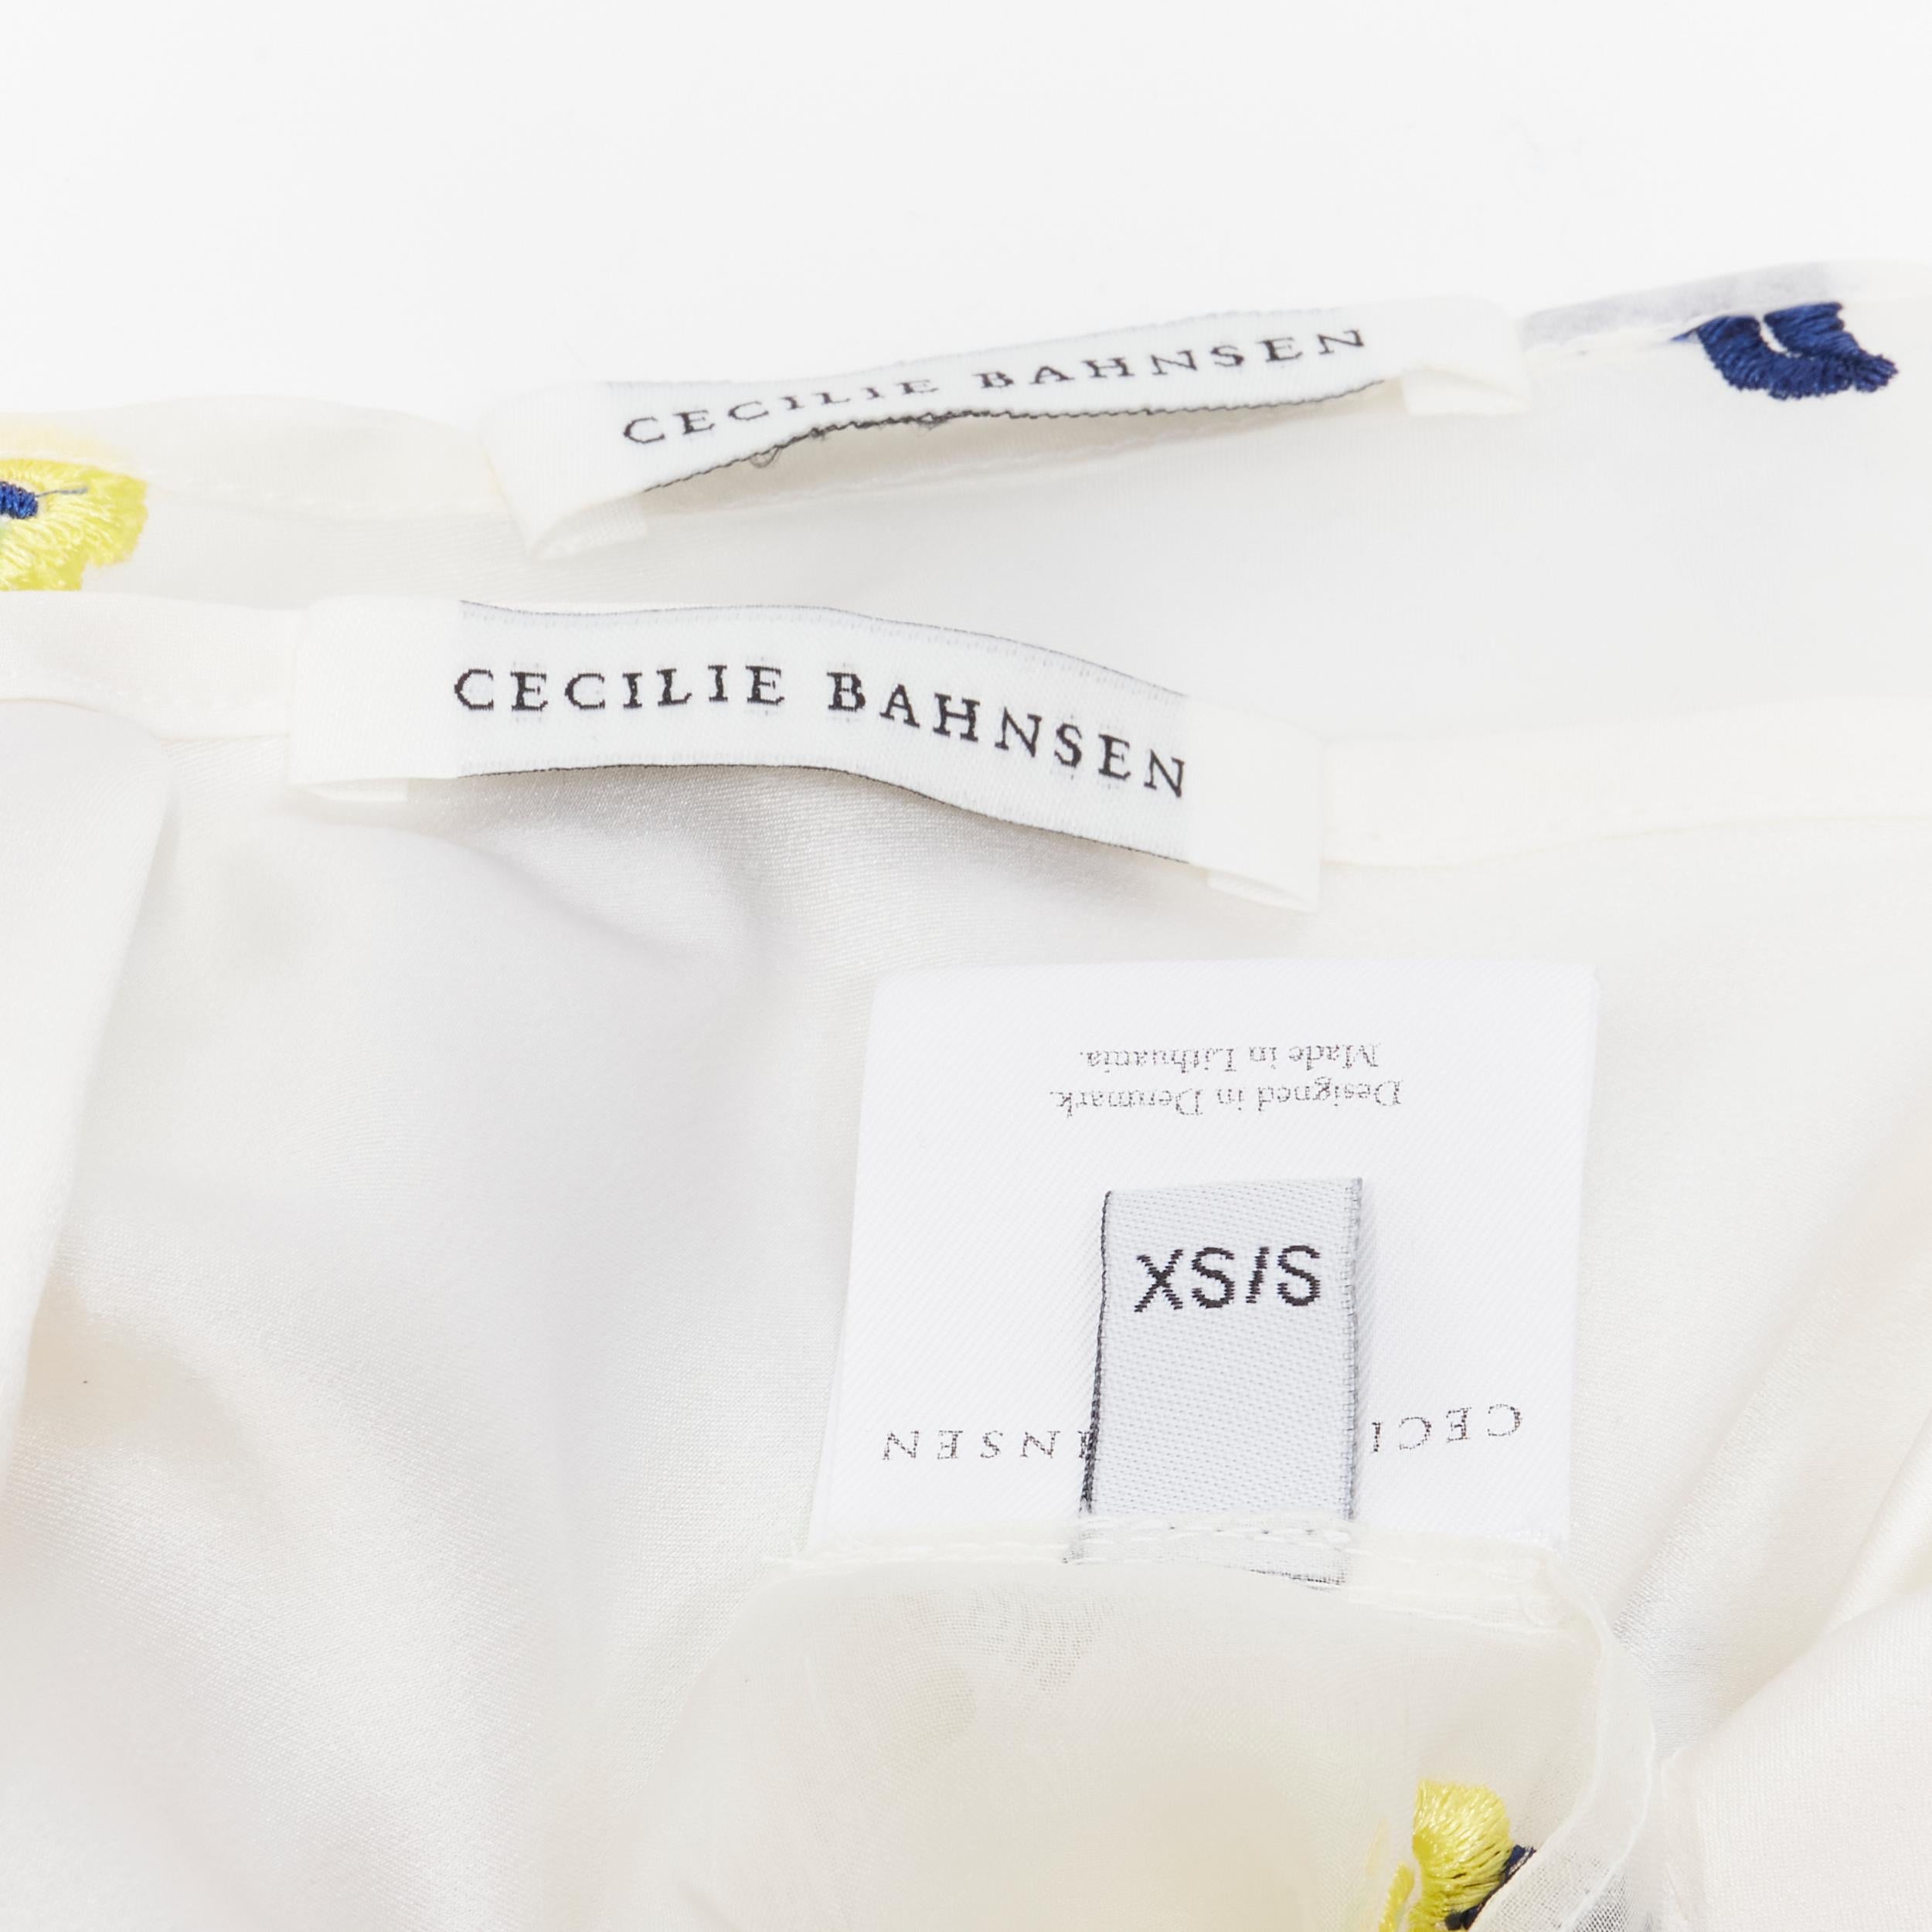 CECILIE BAHNSEN Runway white blue yellow floral embroidery sheer puff dress XS 4